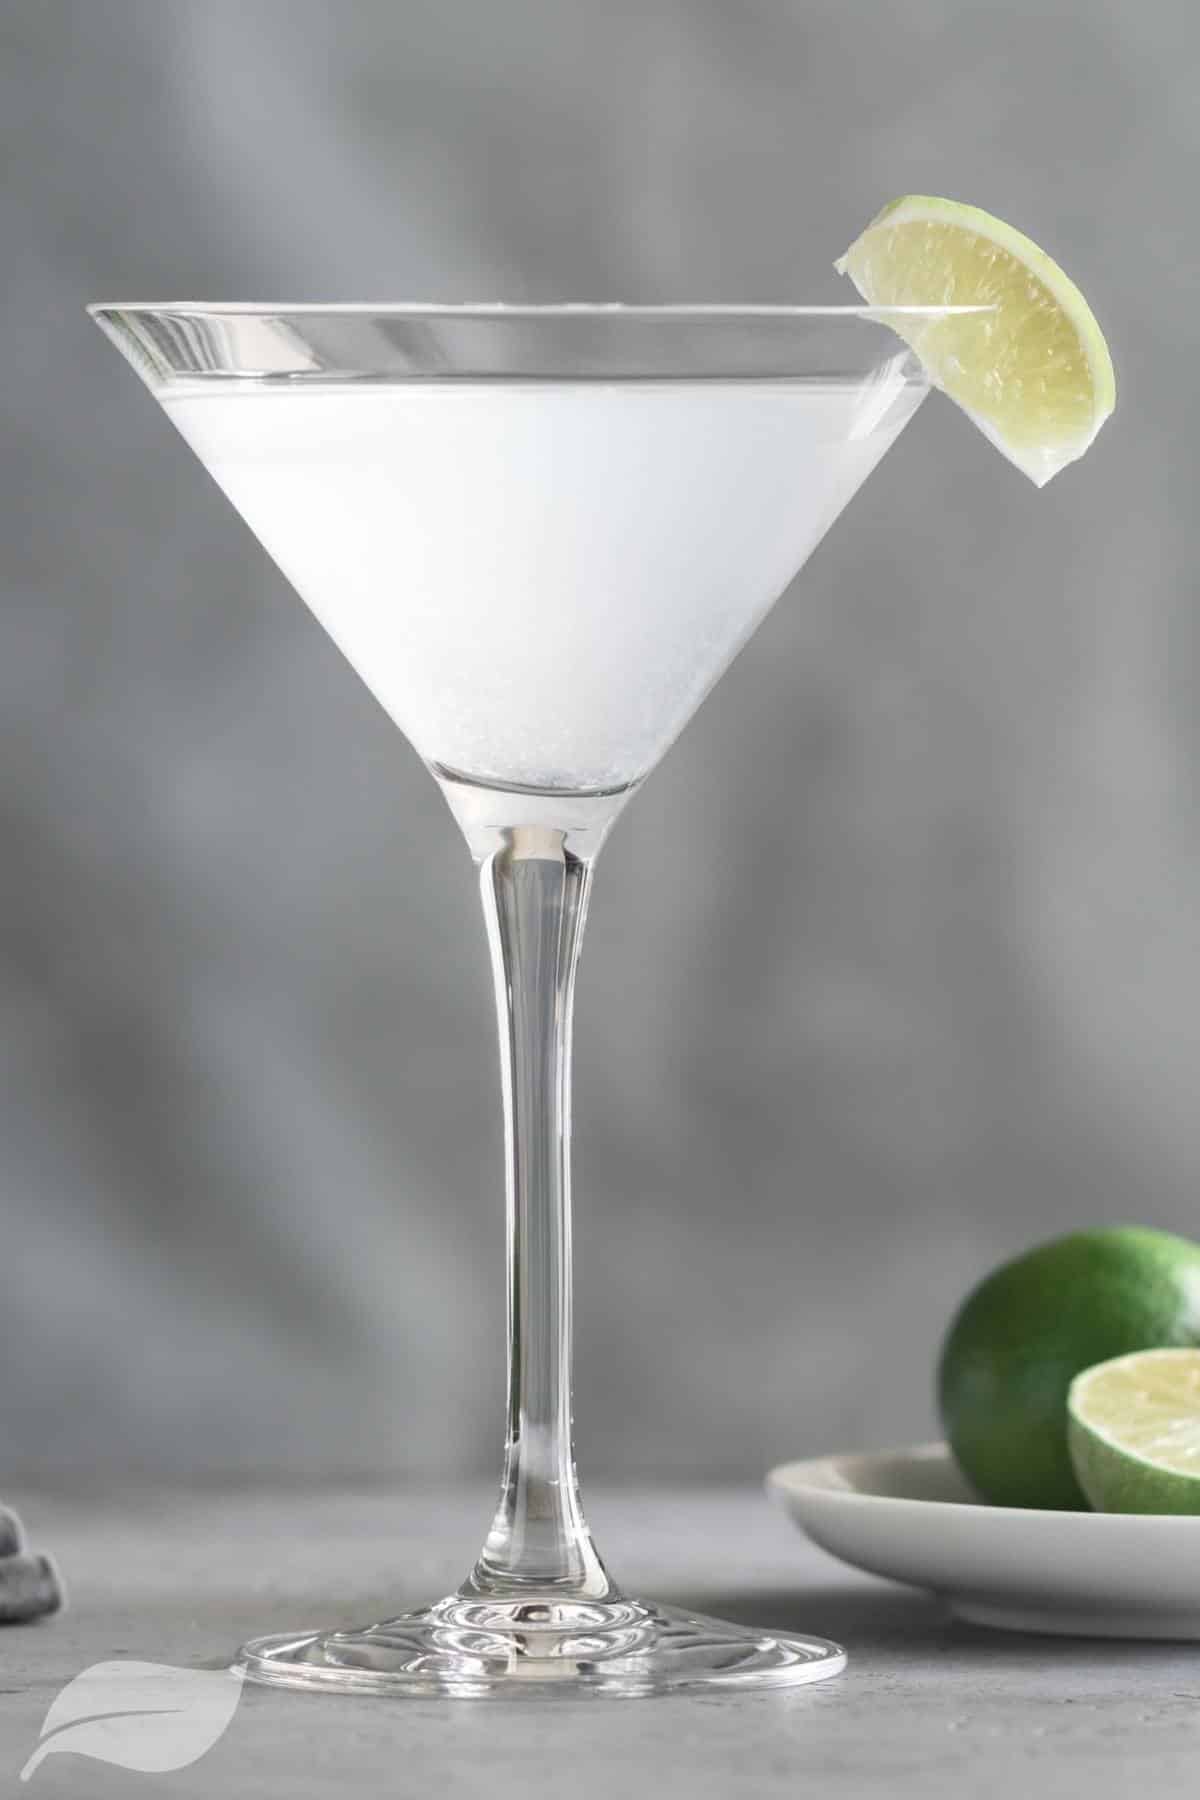 Kamikaze cocktail with limes on a plate